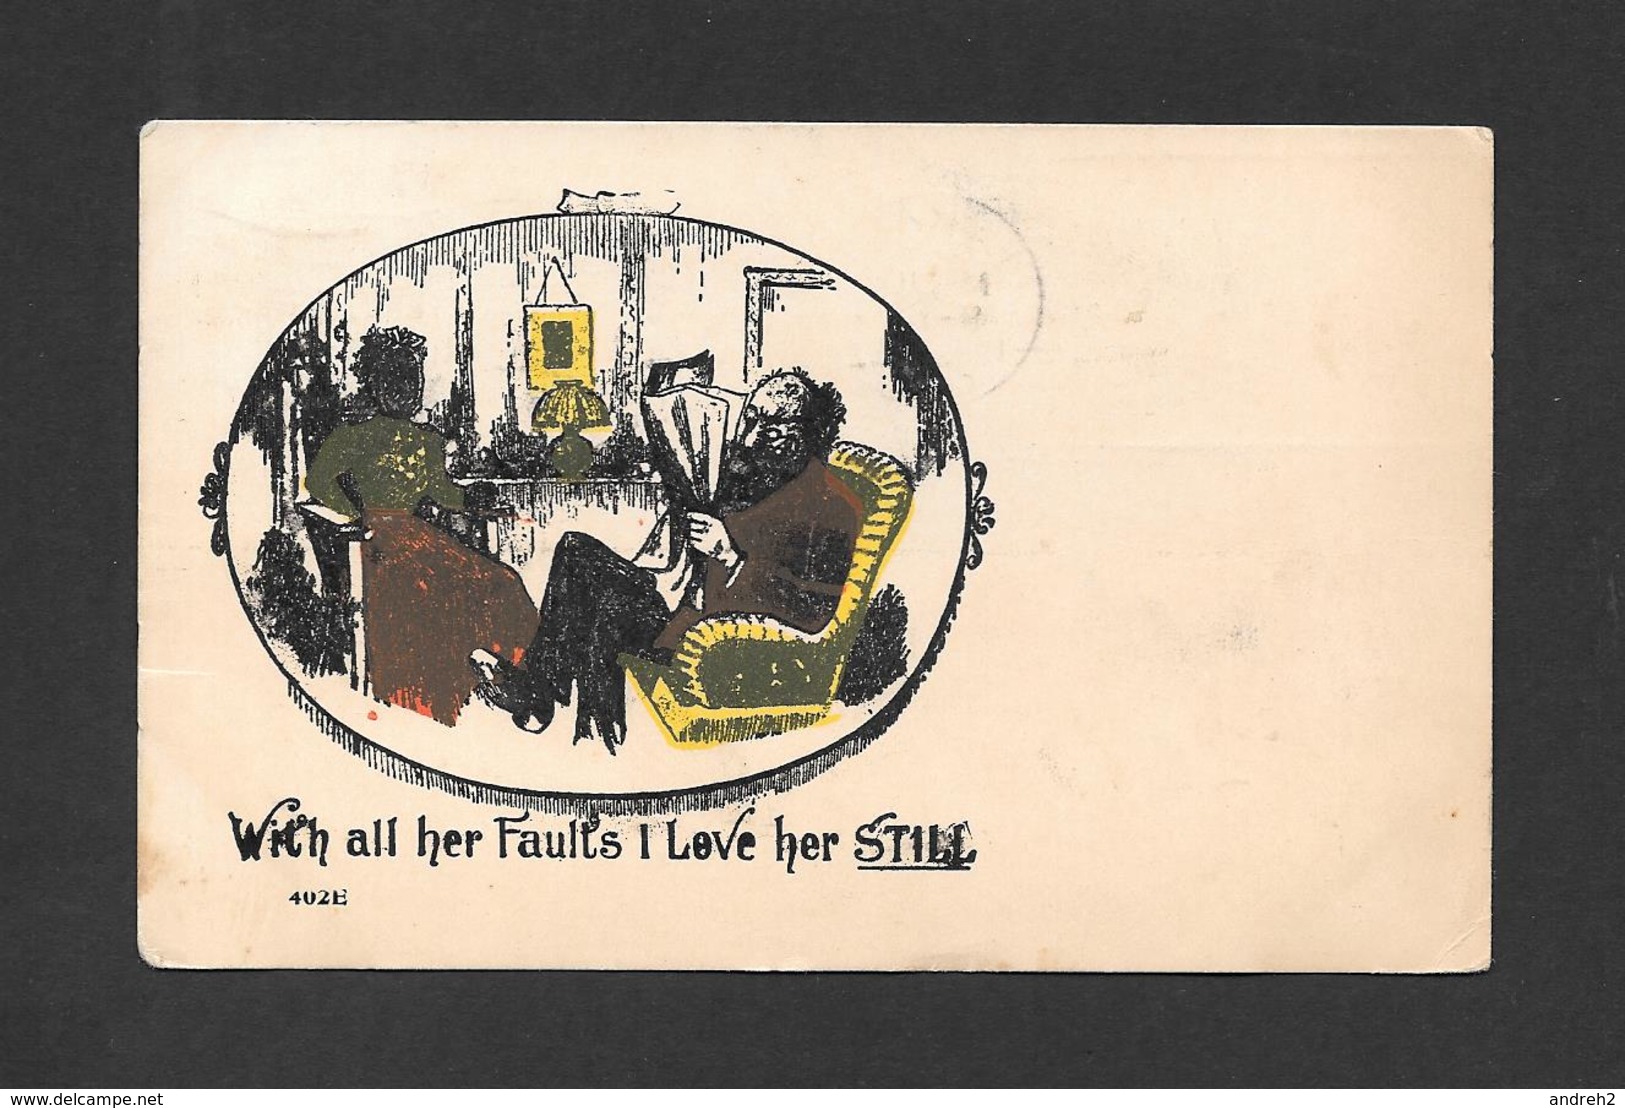 HUMOUR - WITH ALL HER FAULTS I LOVE HER STILL - POSTMARKED 1904 AND WONDERFUL STAMP - Humour